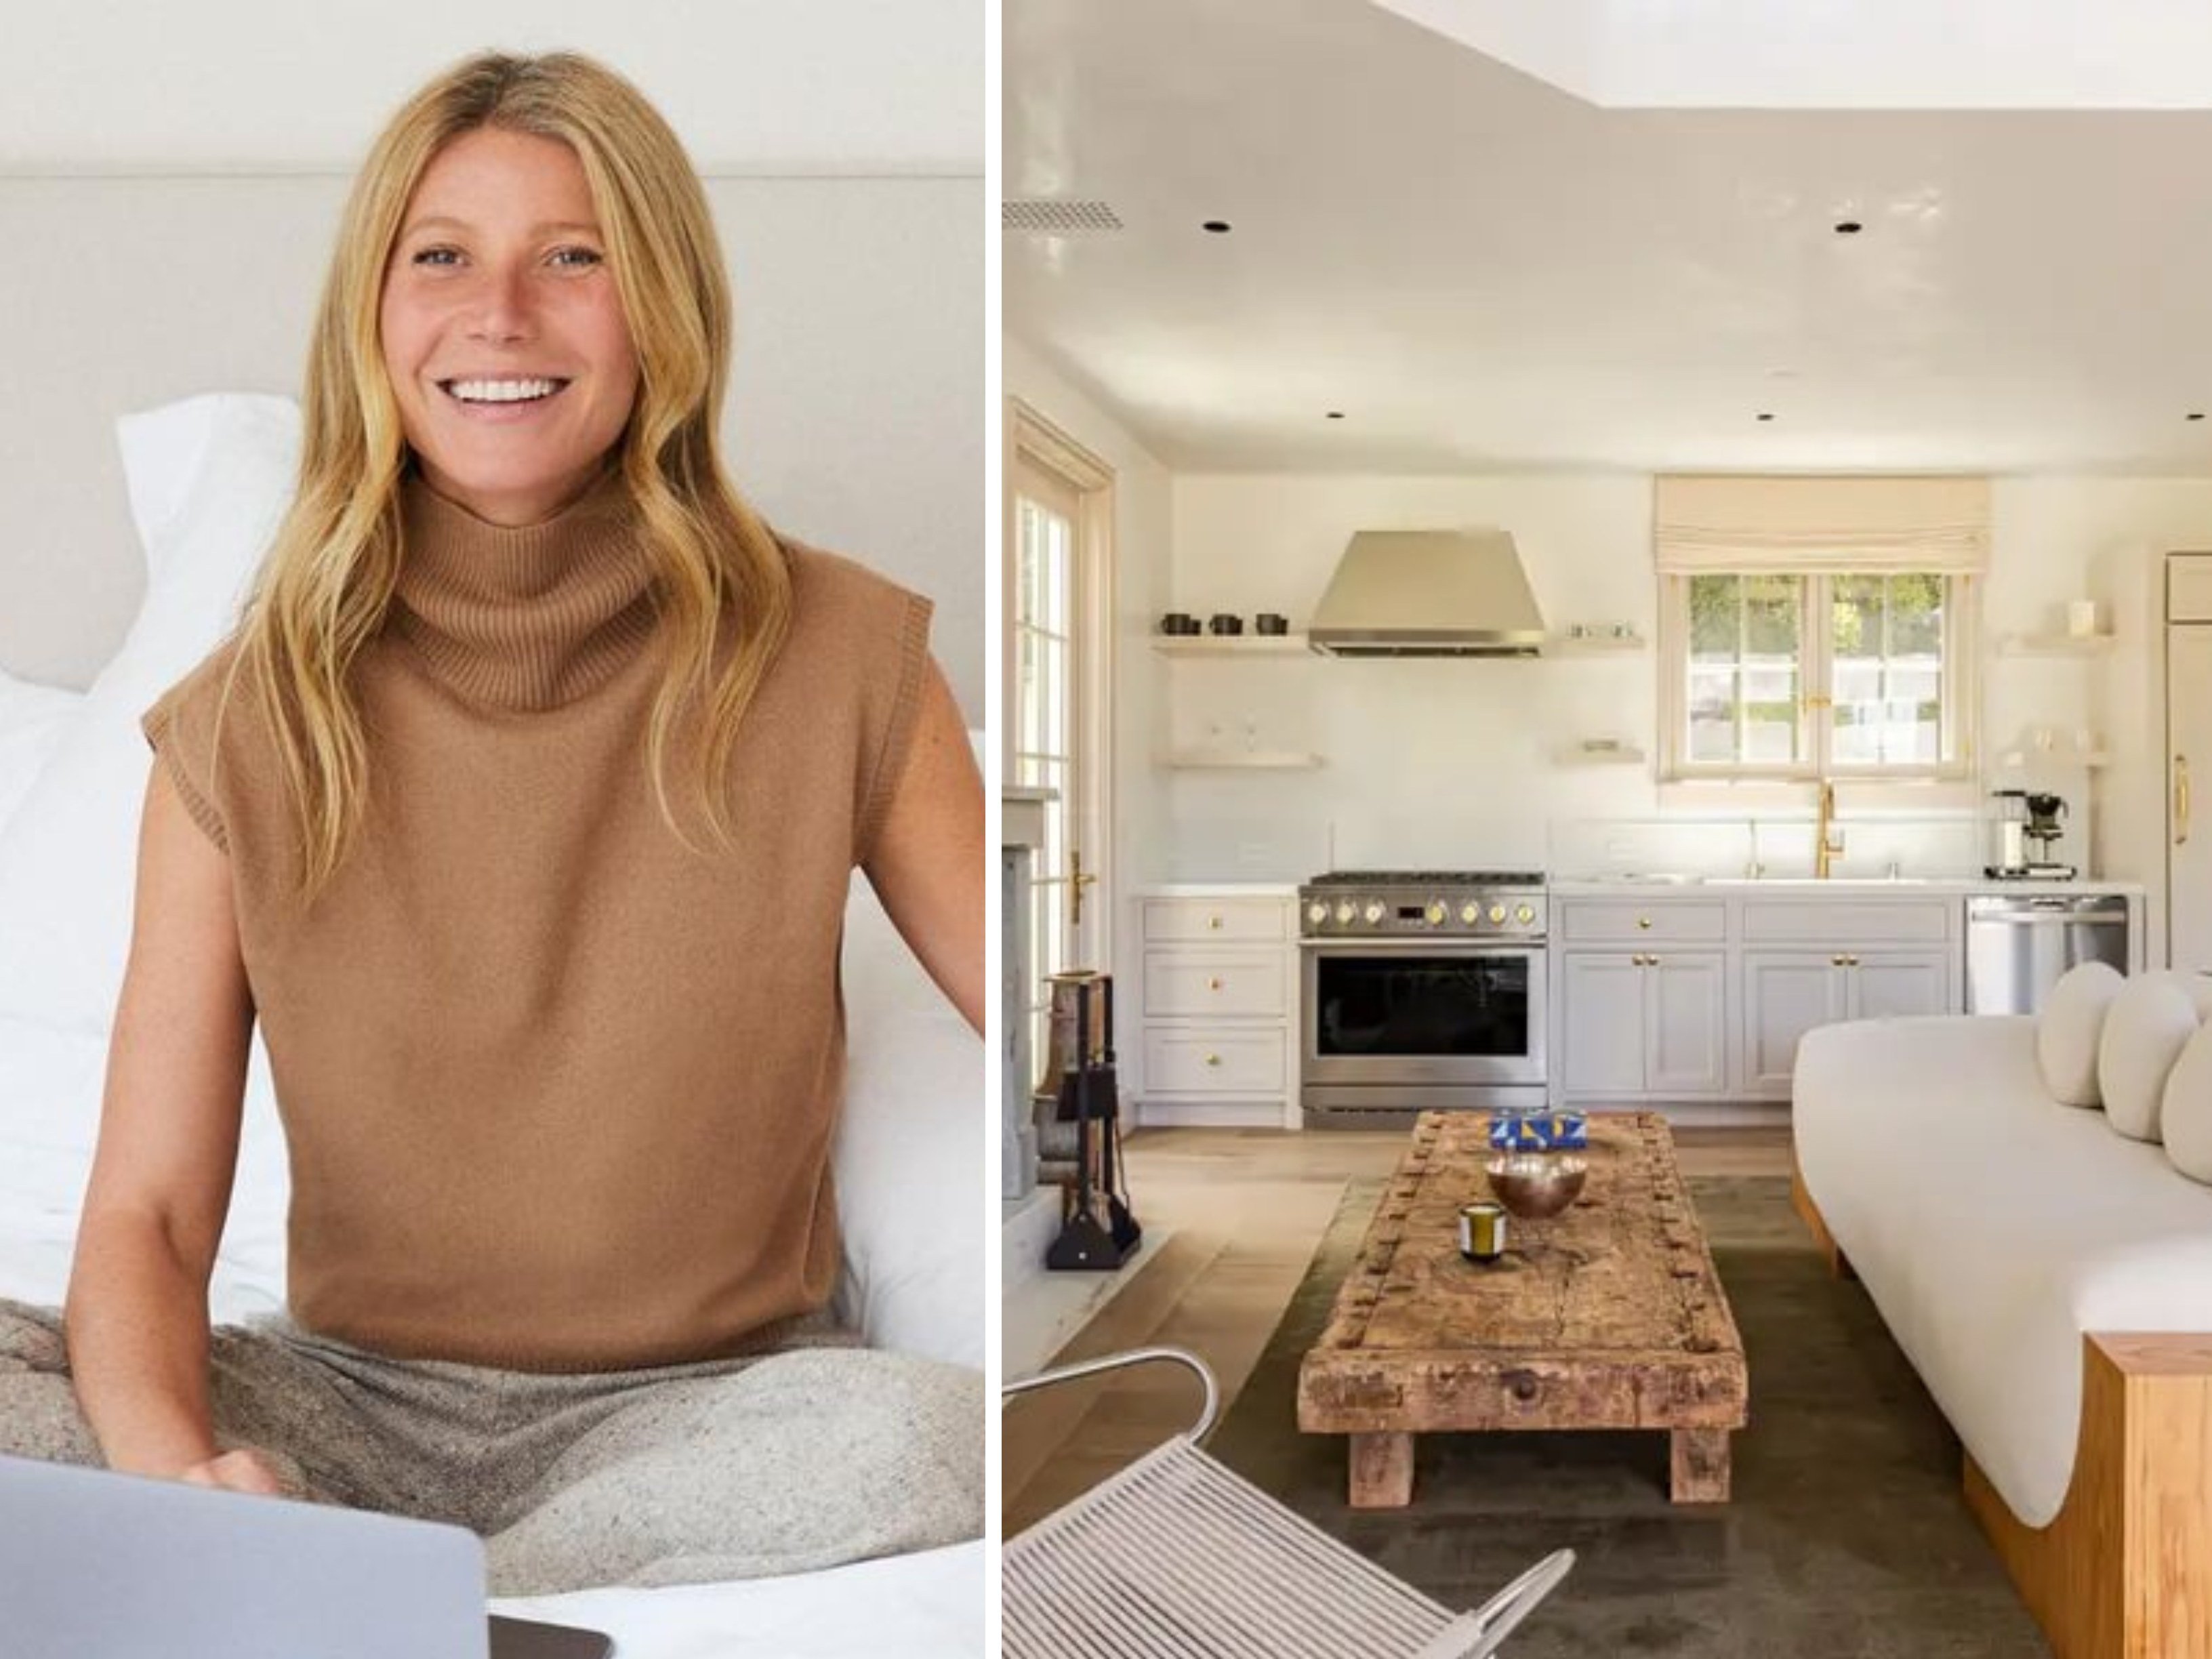 Gwyneth Paltrow is giving away a one-night stay at her Montecito, California guest house this year. Photos: @gwynethpaltrow/Instagram, Handout